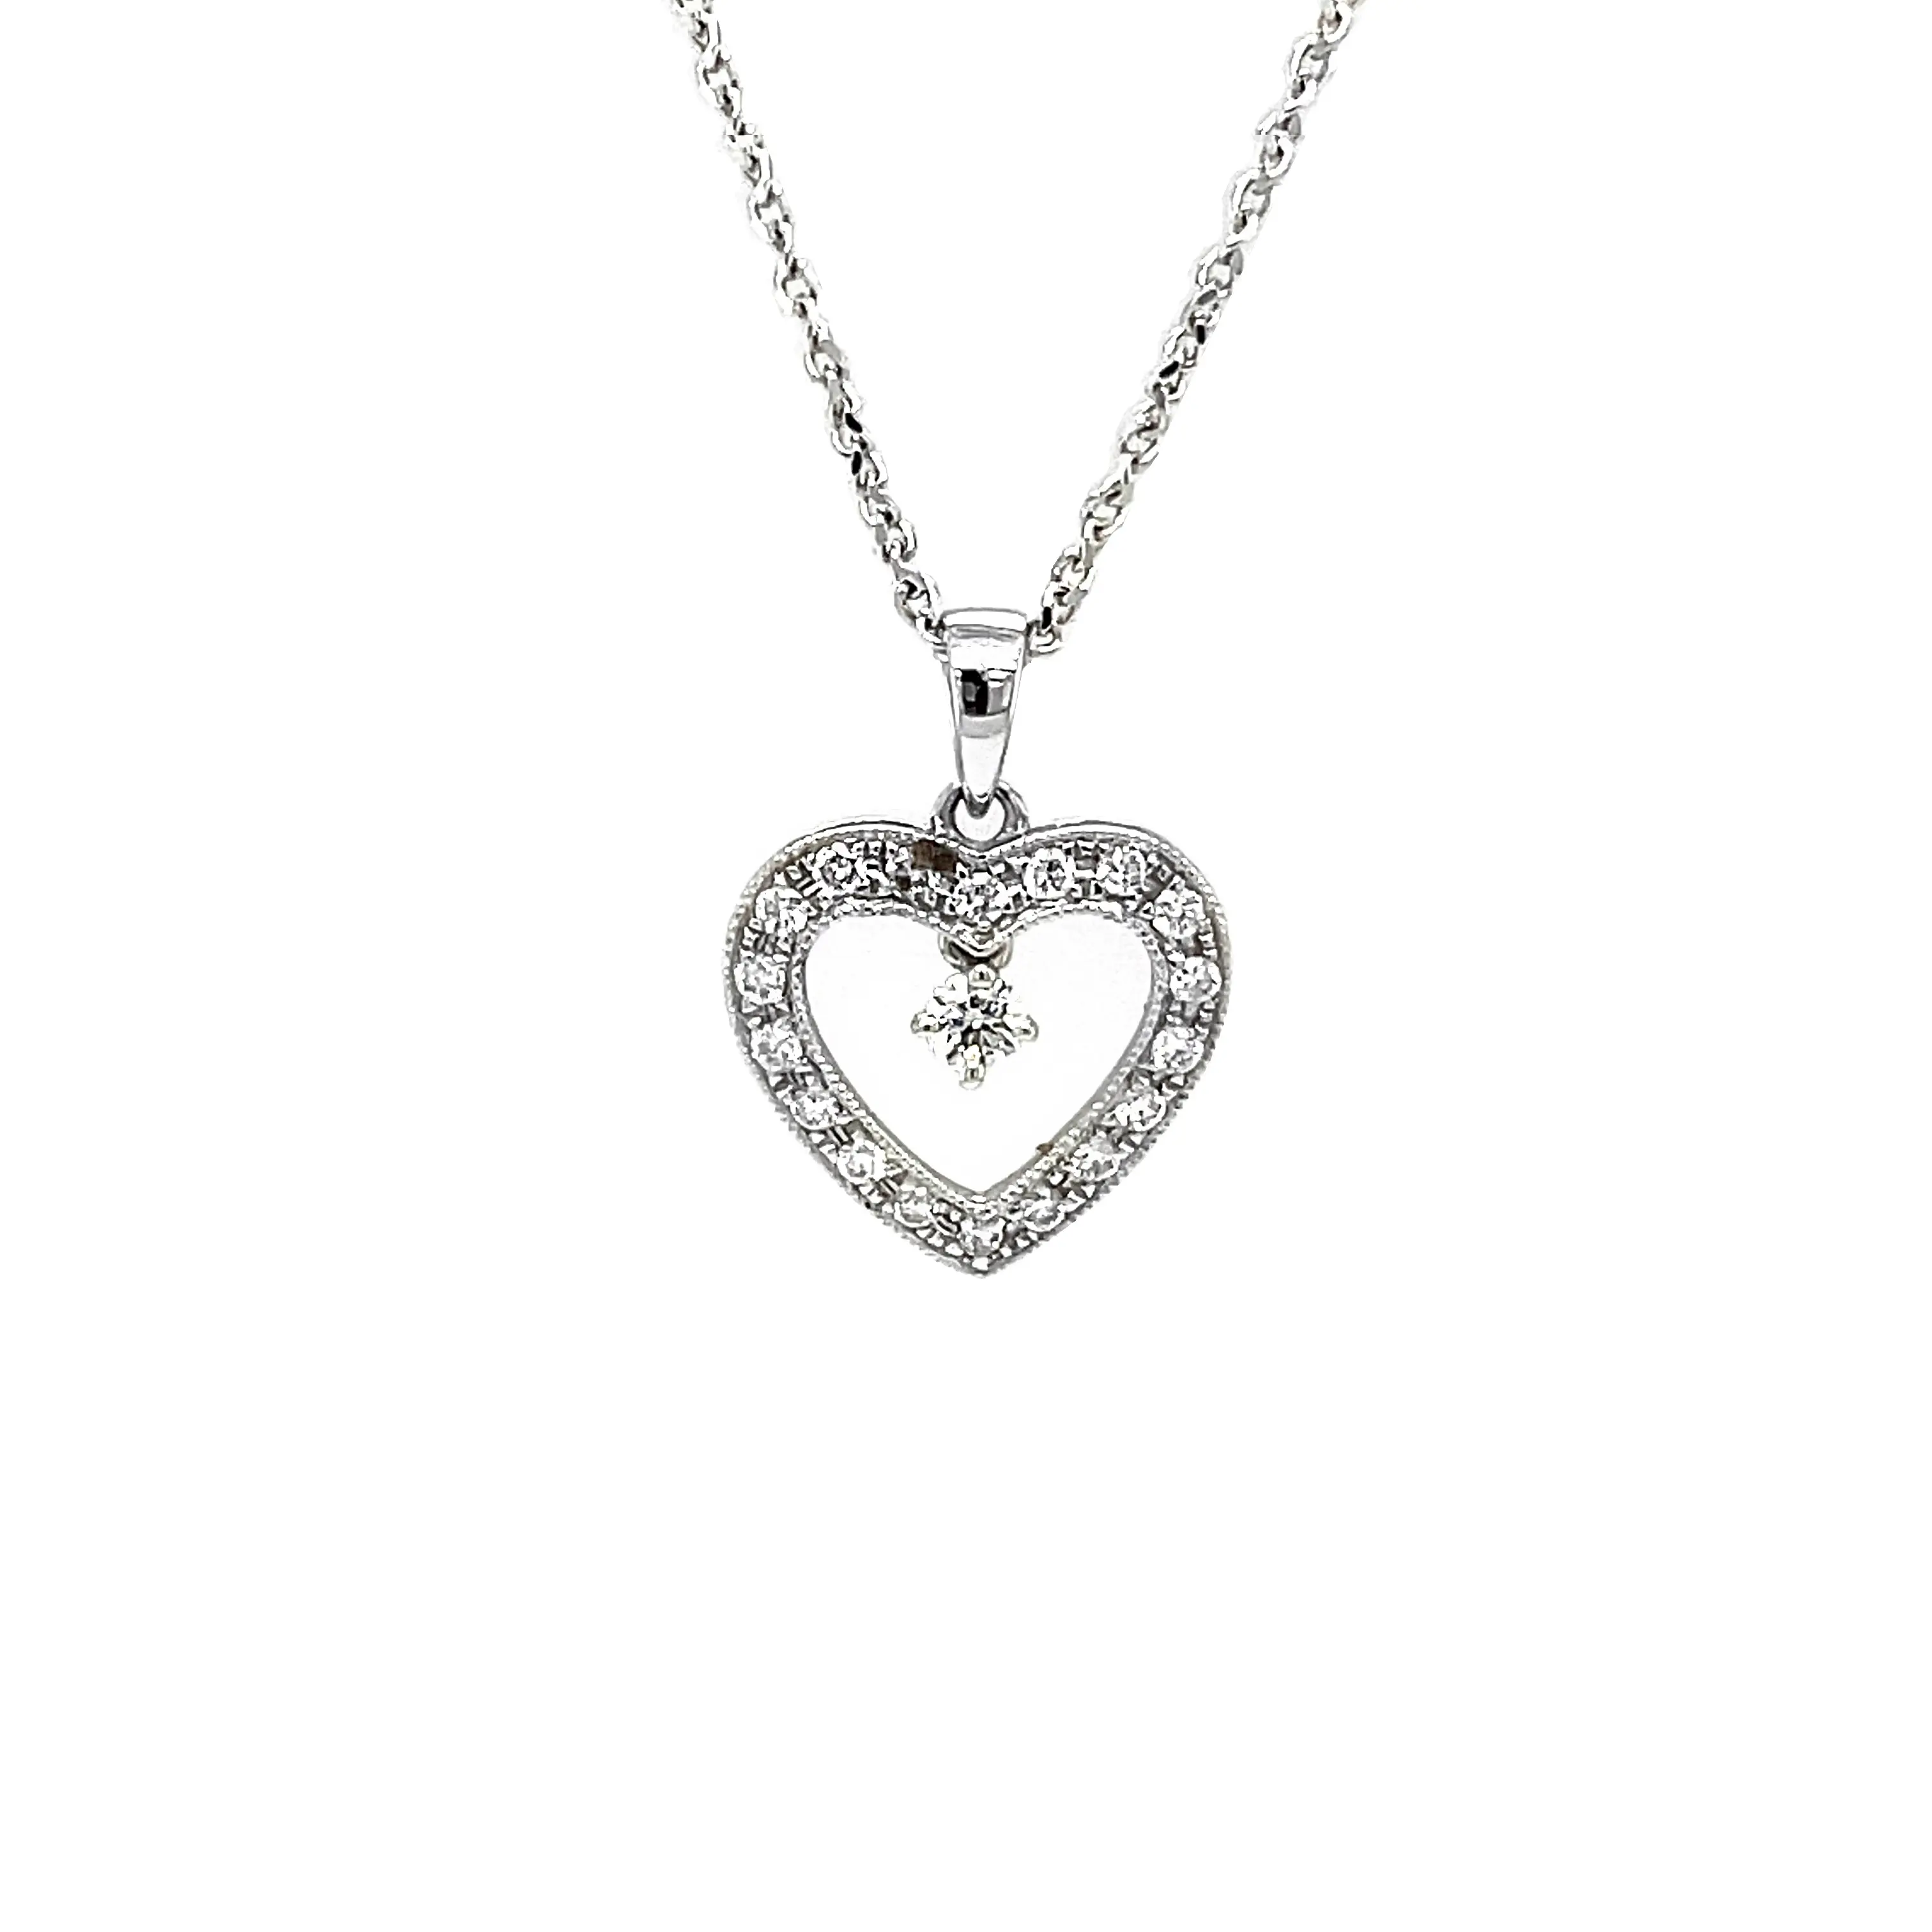 18K White Gold Fashionable Love Heart Shaped Natural Diamond Pendant for Wed Anniversary Gift